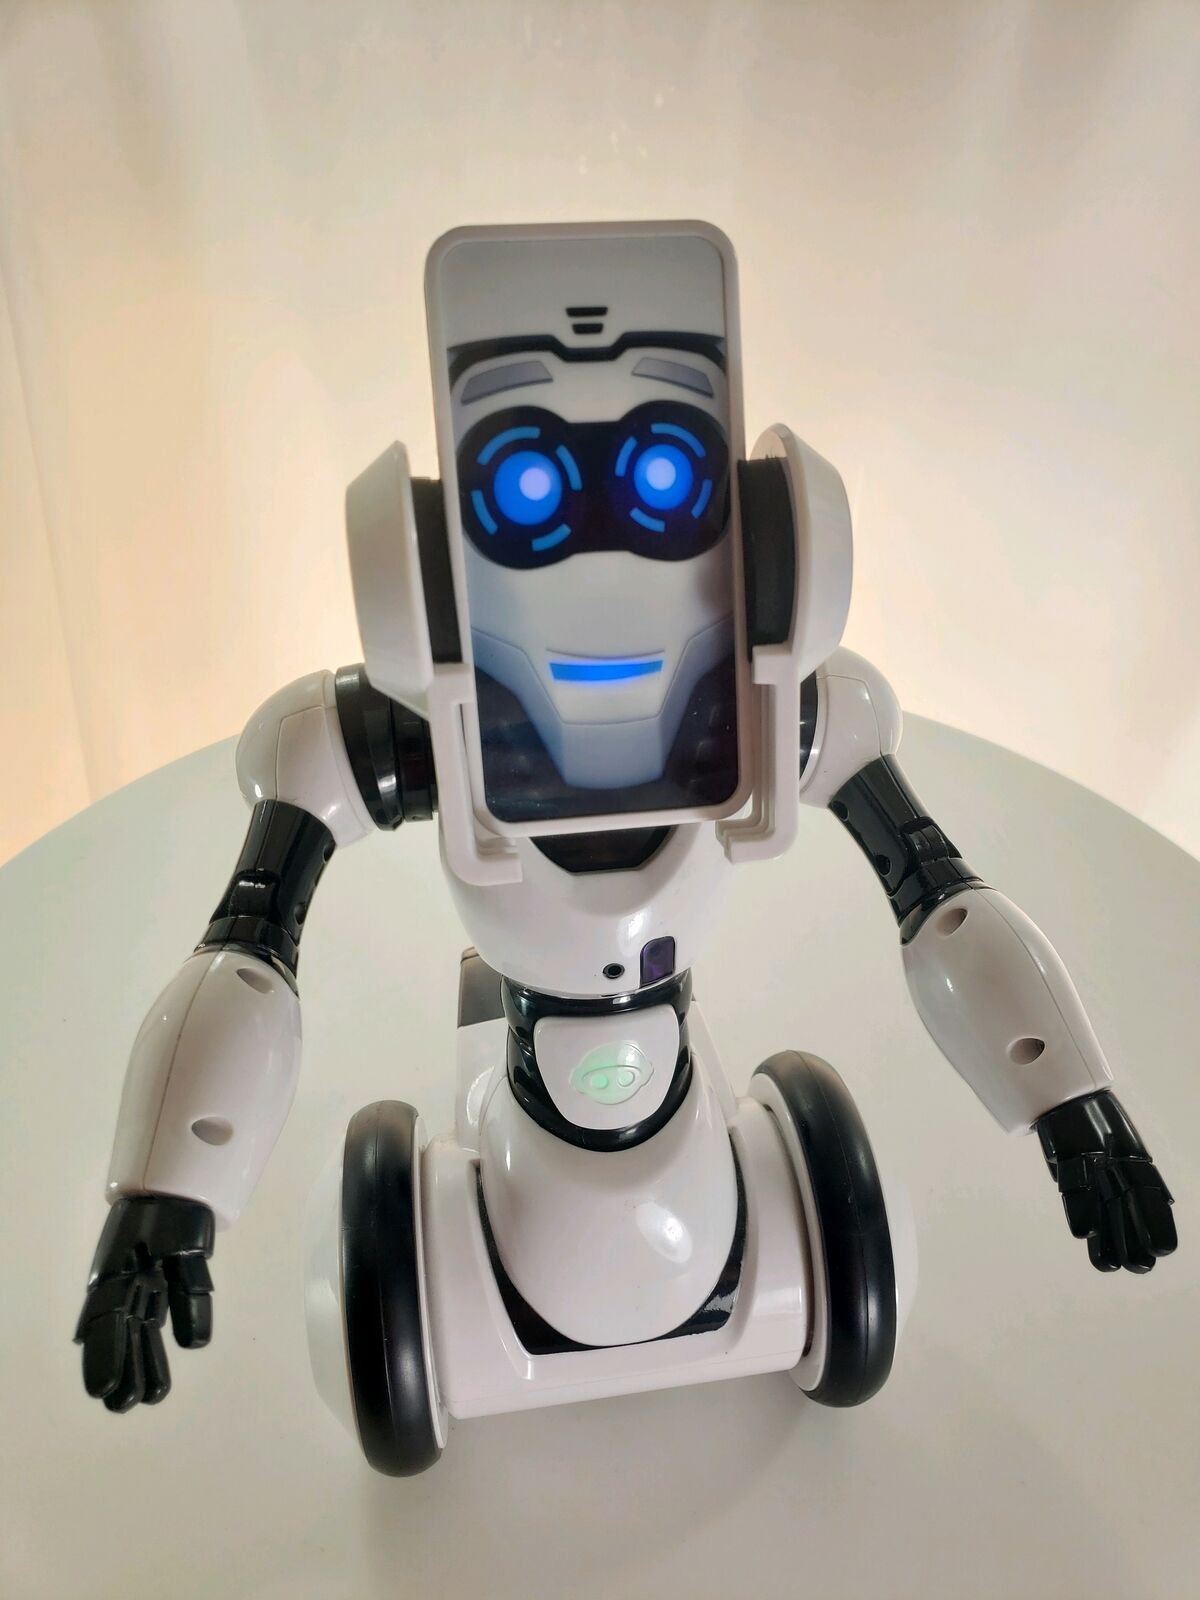 WowWee RoboMe Robot Customizable Robotic Voice Recognition FOR REPLACEMENT PARTS